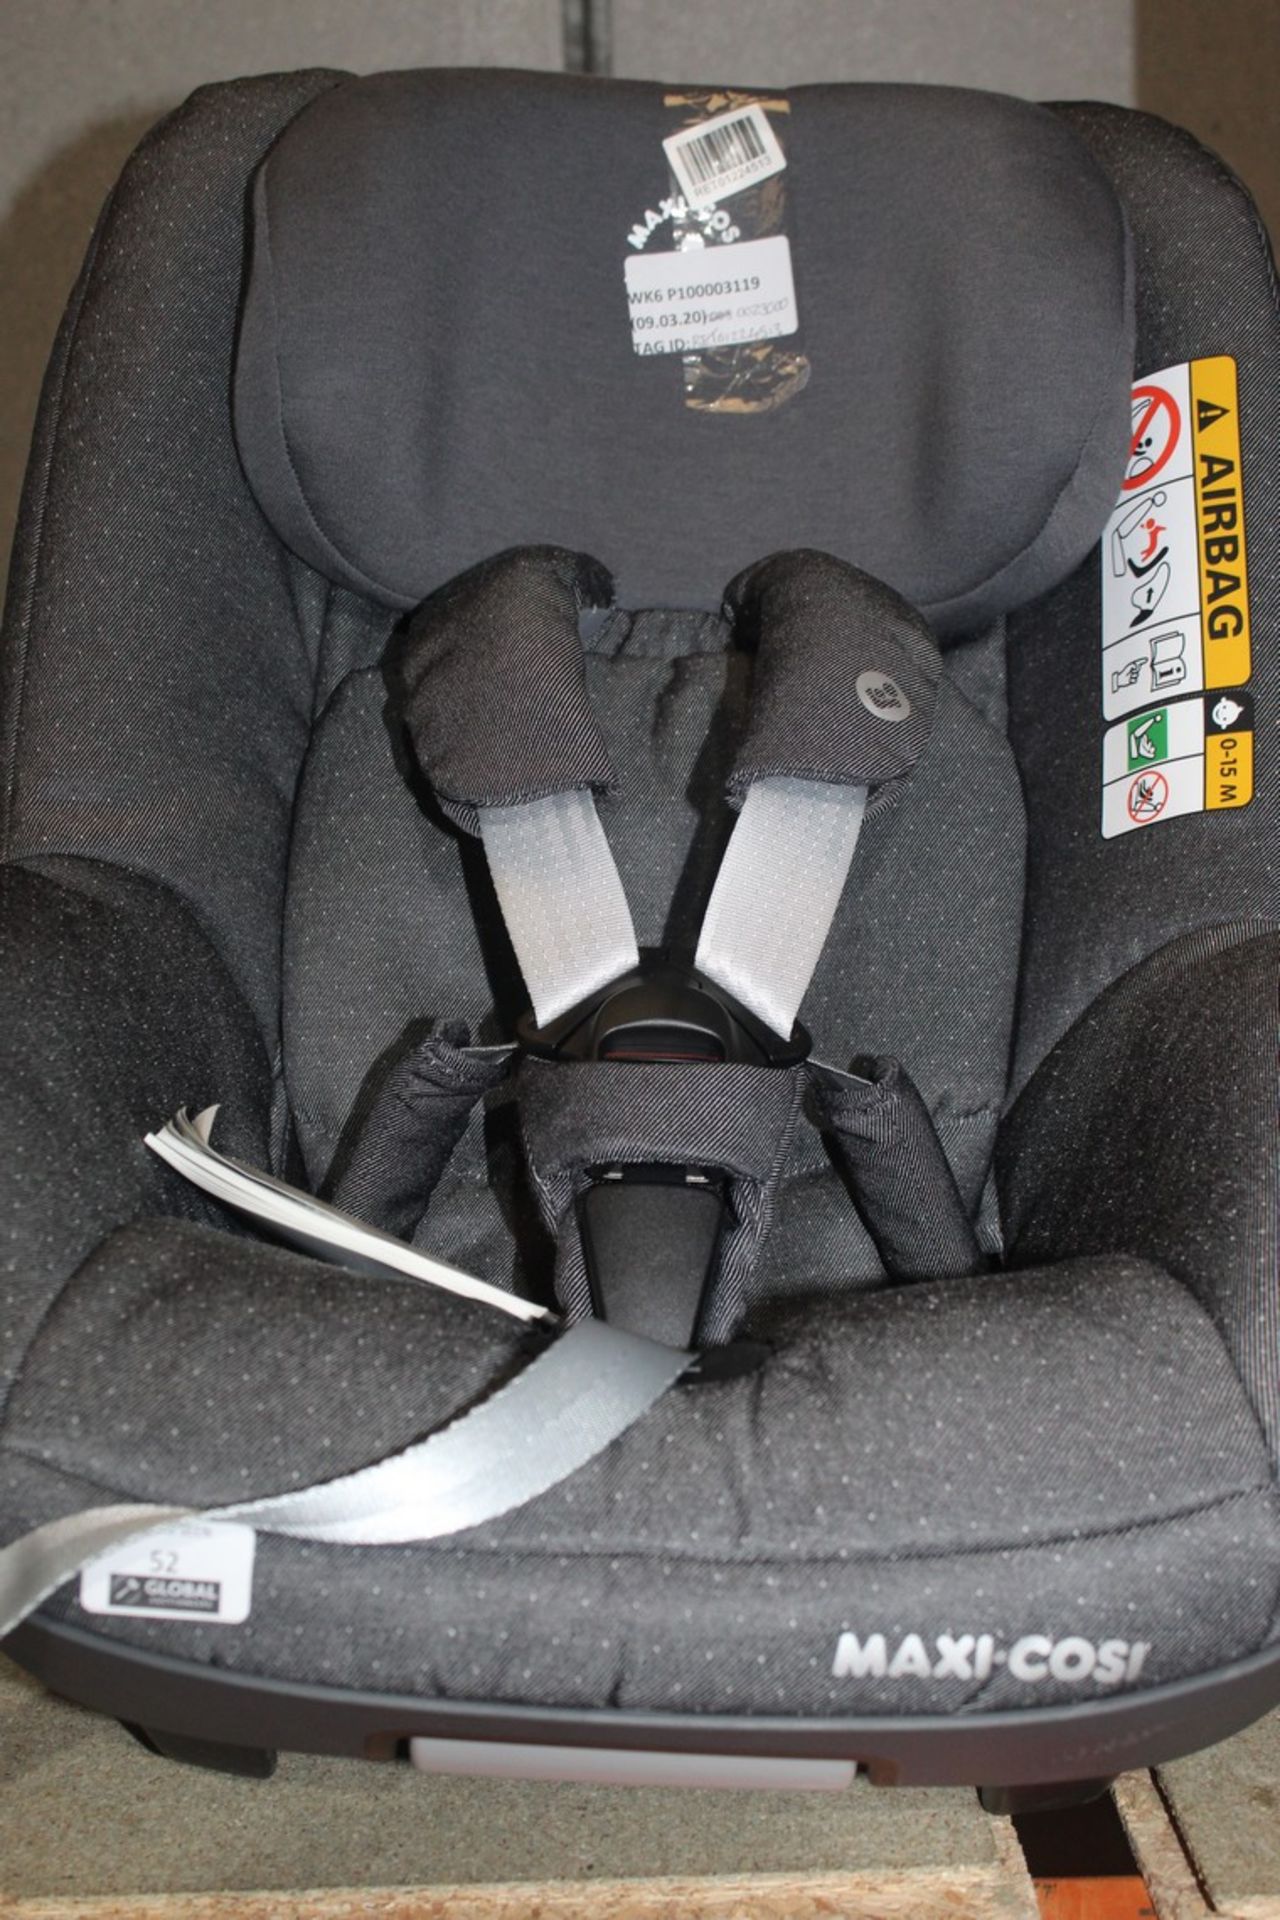 Maxi-Cosi ECER129 Childrens Safety Seat RRP £230 (RET01224513)